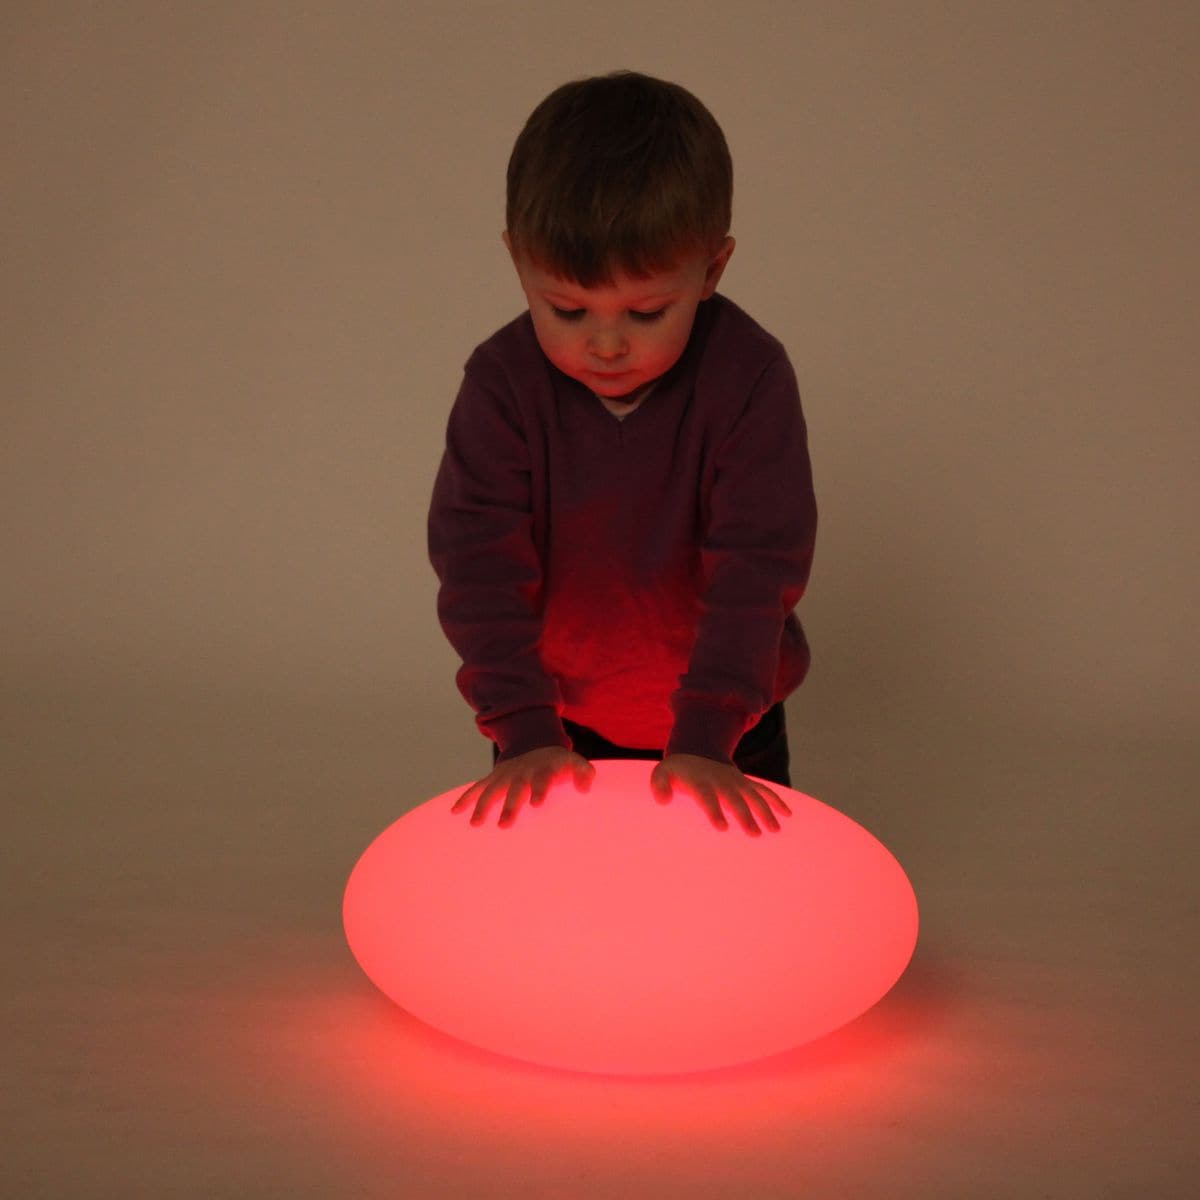 Sensory Mood Pebble, The TickiT® Sensory Mood Pebble is an ultra-strong and durable hollow pebble that your child can use in their bedroom or sensory area. It illuminates to create soft mood lighting, ideal as a night light or for creating a calm and captivating experience during sensory play.There are other shapes available in the Sensory Mood range including: ball, pyramid, egg, cube and a mood table and mood water table.Use the remote control to select one of 16 different colours for a constant soft glow